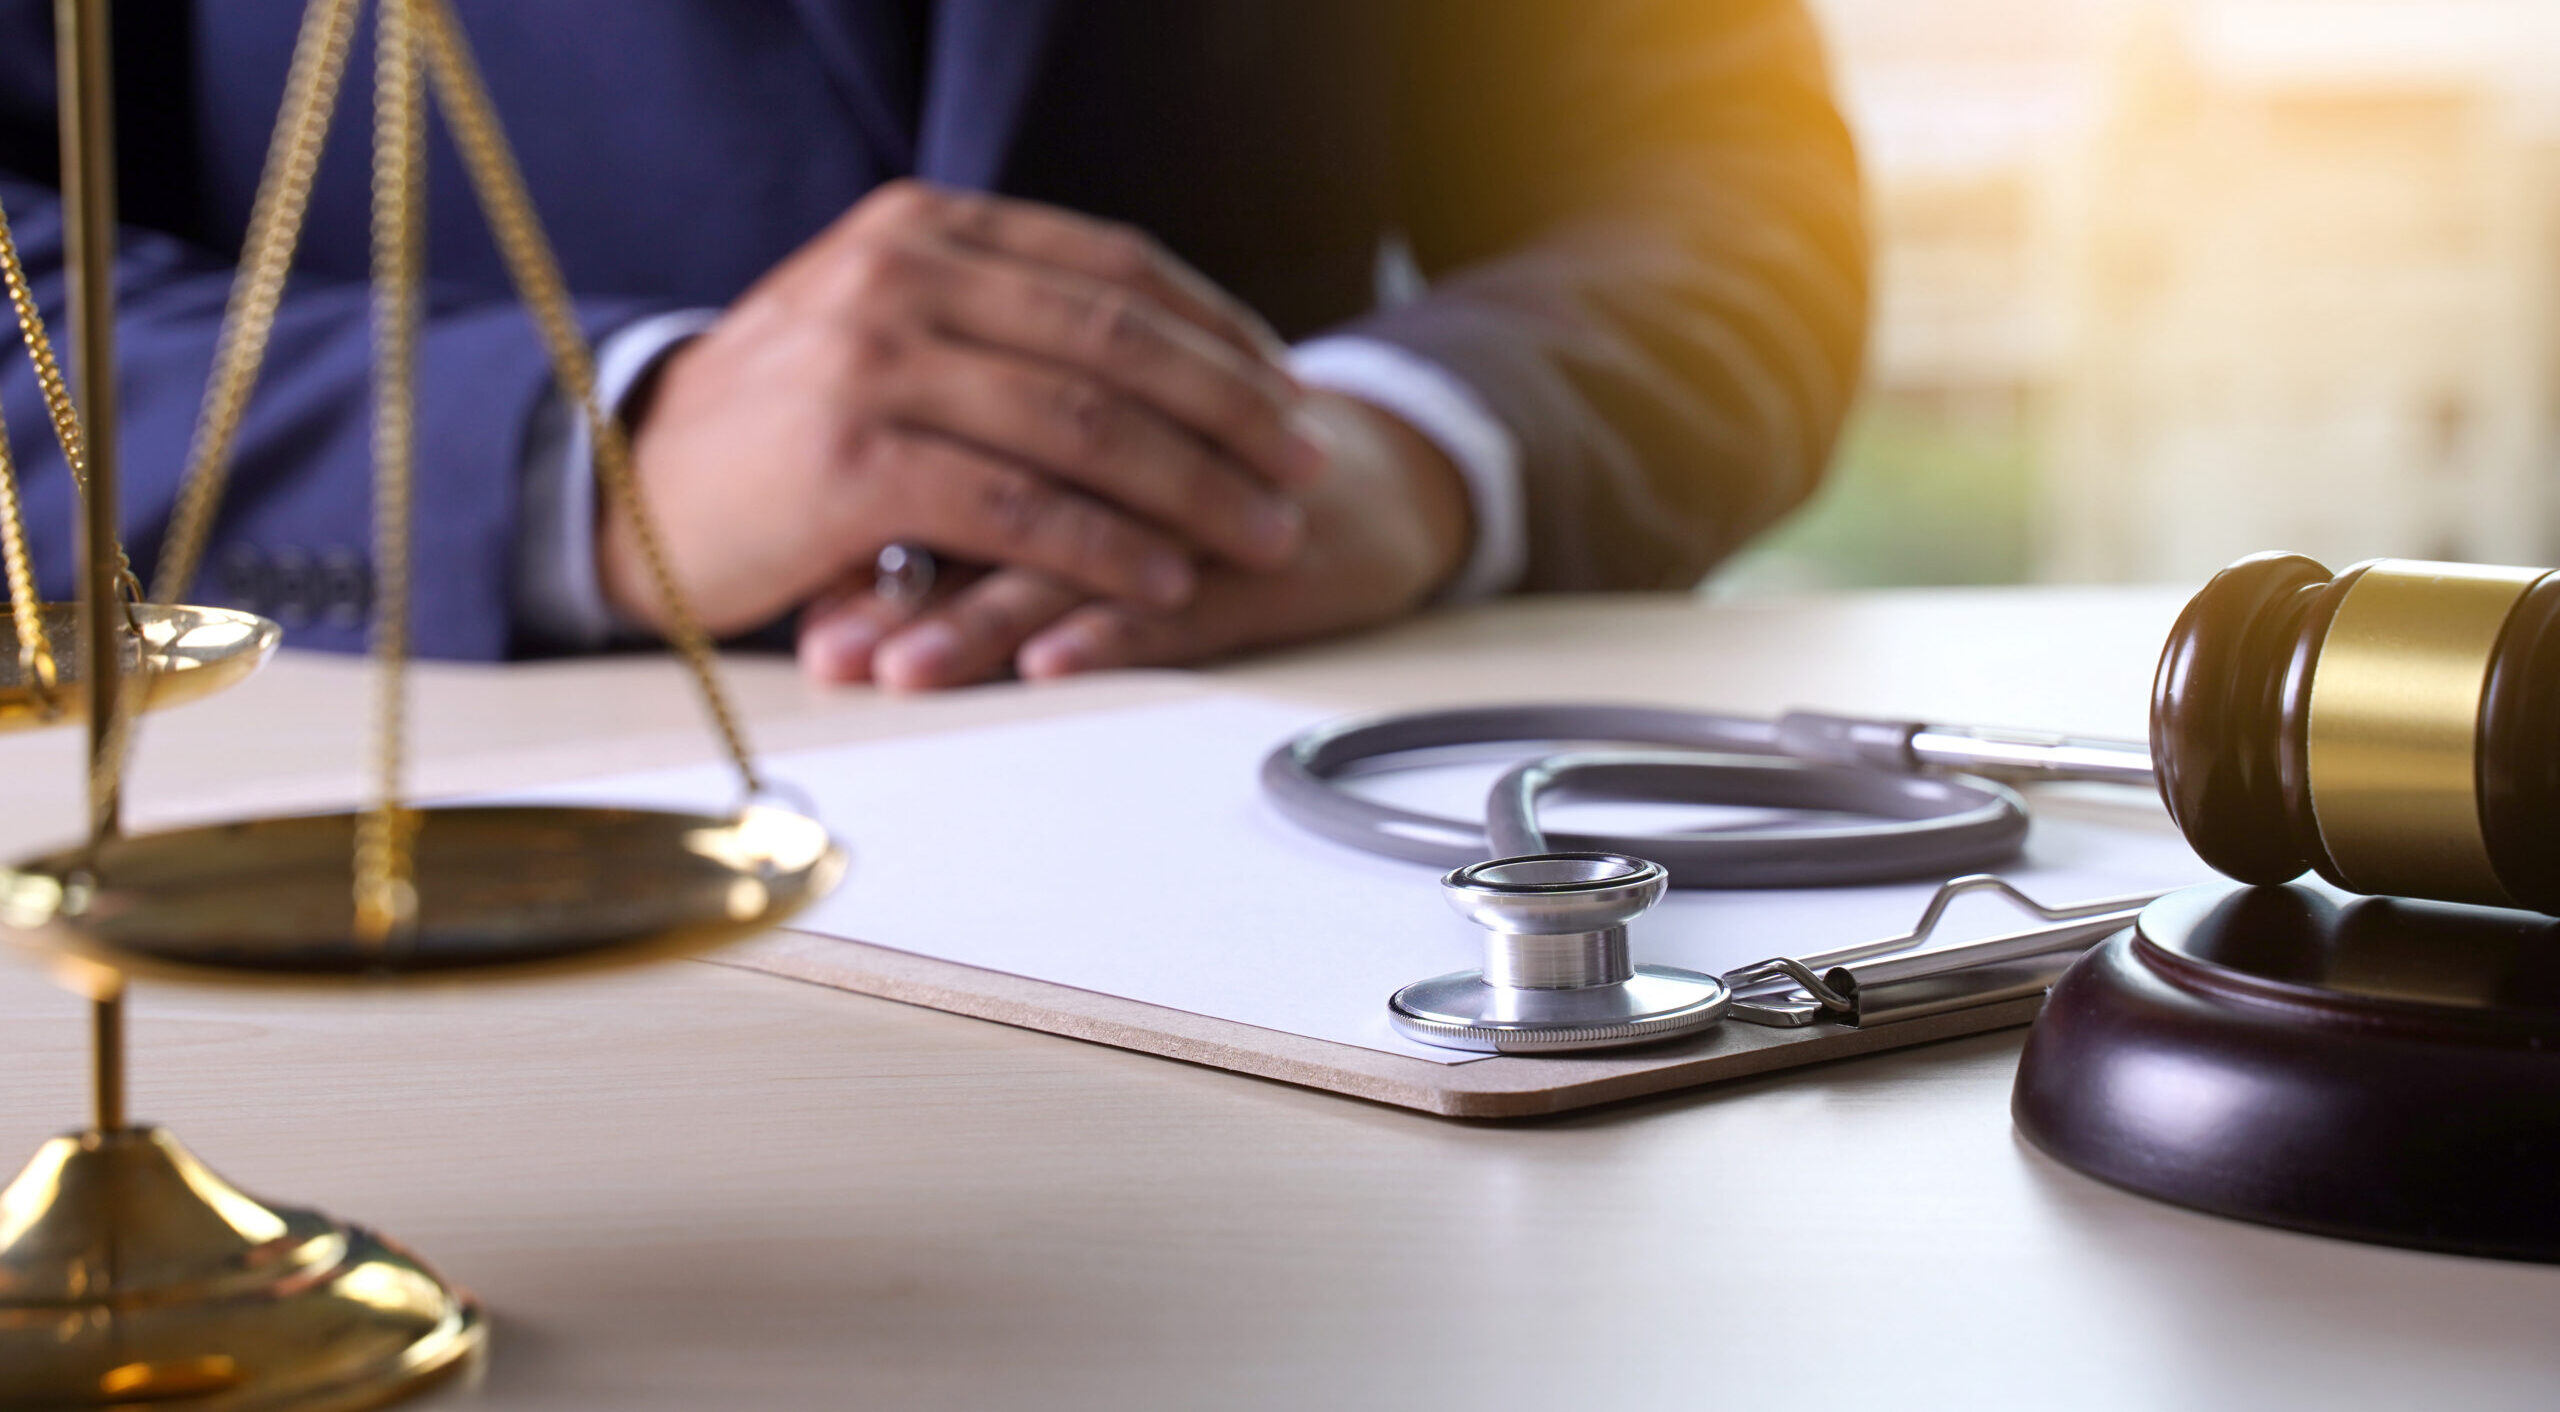 Duty of Care & Medical Negligence: Your Rights, Their Responsibility